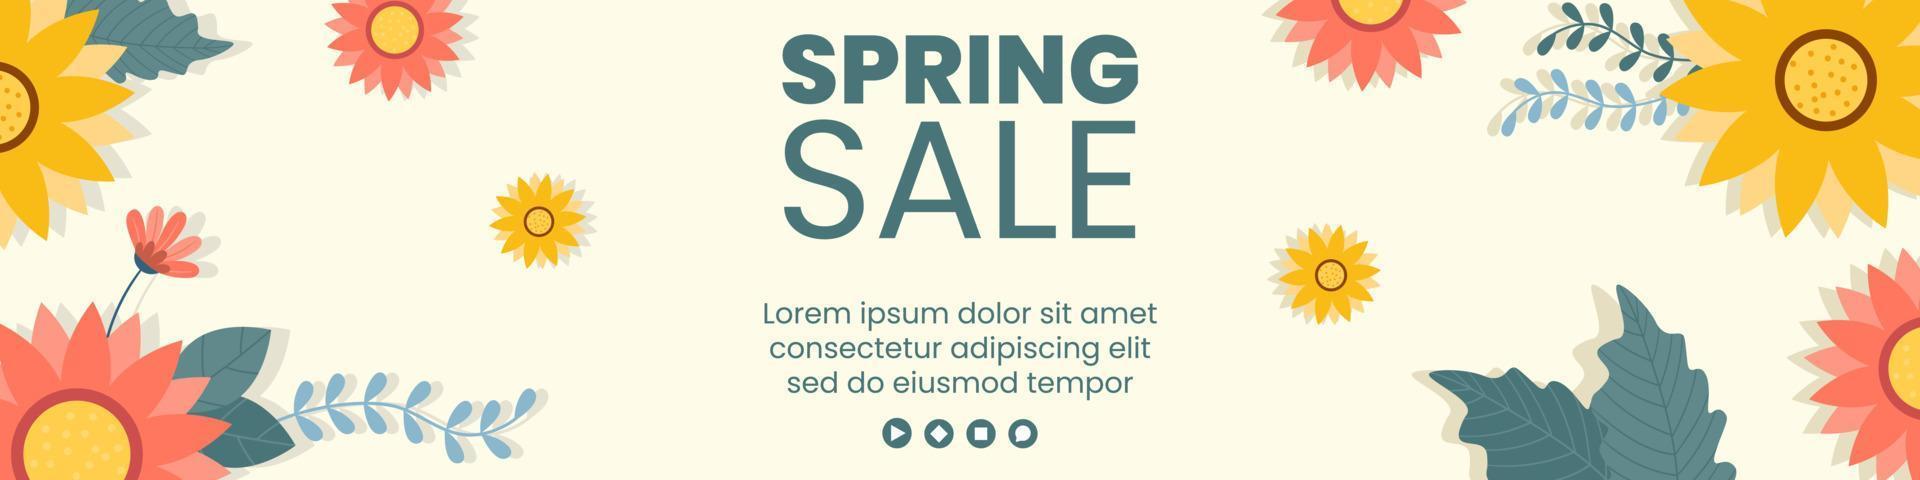 Spring Sale with Blossom Flowers Banner Template Flat Design Illustration Editable of Square Background for Social Media or Greeting Card vector